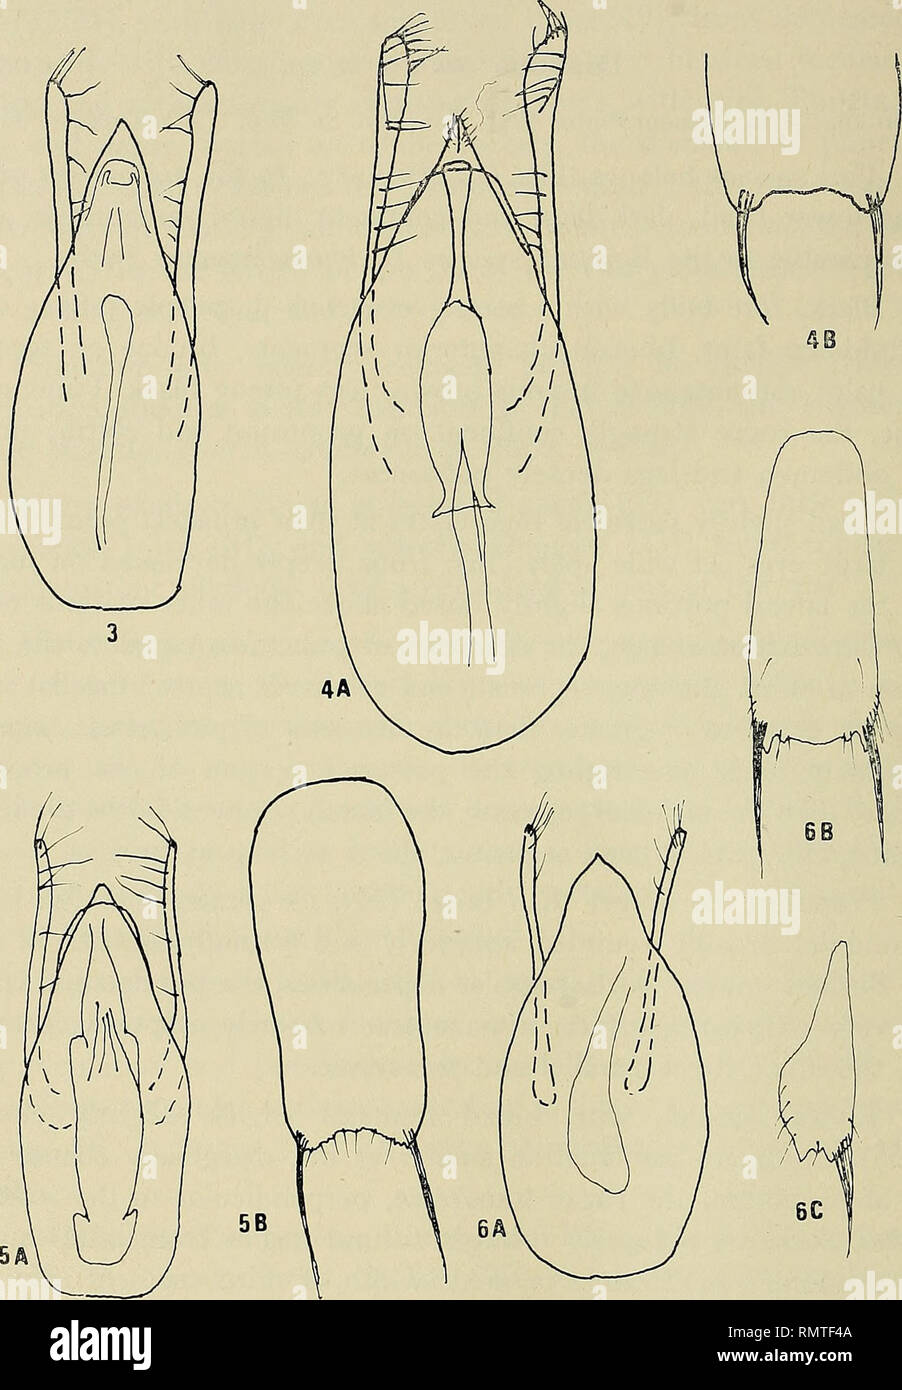 . Annali del Museo civico di storia naturale Giacomo Doria. Natural history. 362 G.M. DE ROUGEMONT Tergite VII with an apical membranous fringe ; tergite X shiny, rounded at apex, and depressed. Legs fairly long; length of metatibia: 34; length. Figs. 3: Dianons tonkinensis Puthz from Celebes, aedeagus, ventral view; 4: Dianous yao Rougemont from Doi Inthanon - A: aedeagus; B: apex of male 9th sternite; 5: Dianous lahu n. sp. - A: aedeagus; B: male 9th sternite; 6: Dianous meo n. sp. - A: aedeagus; B: male 9th sternite; C: female valvifer.. Please note that these images are extracted from scan Stock Photo